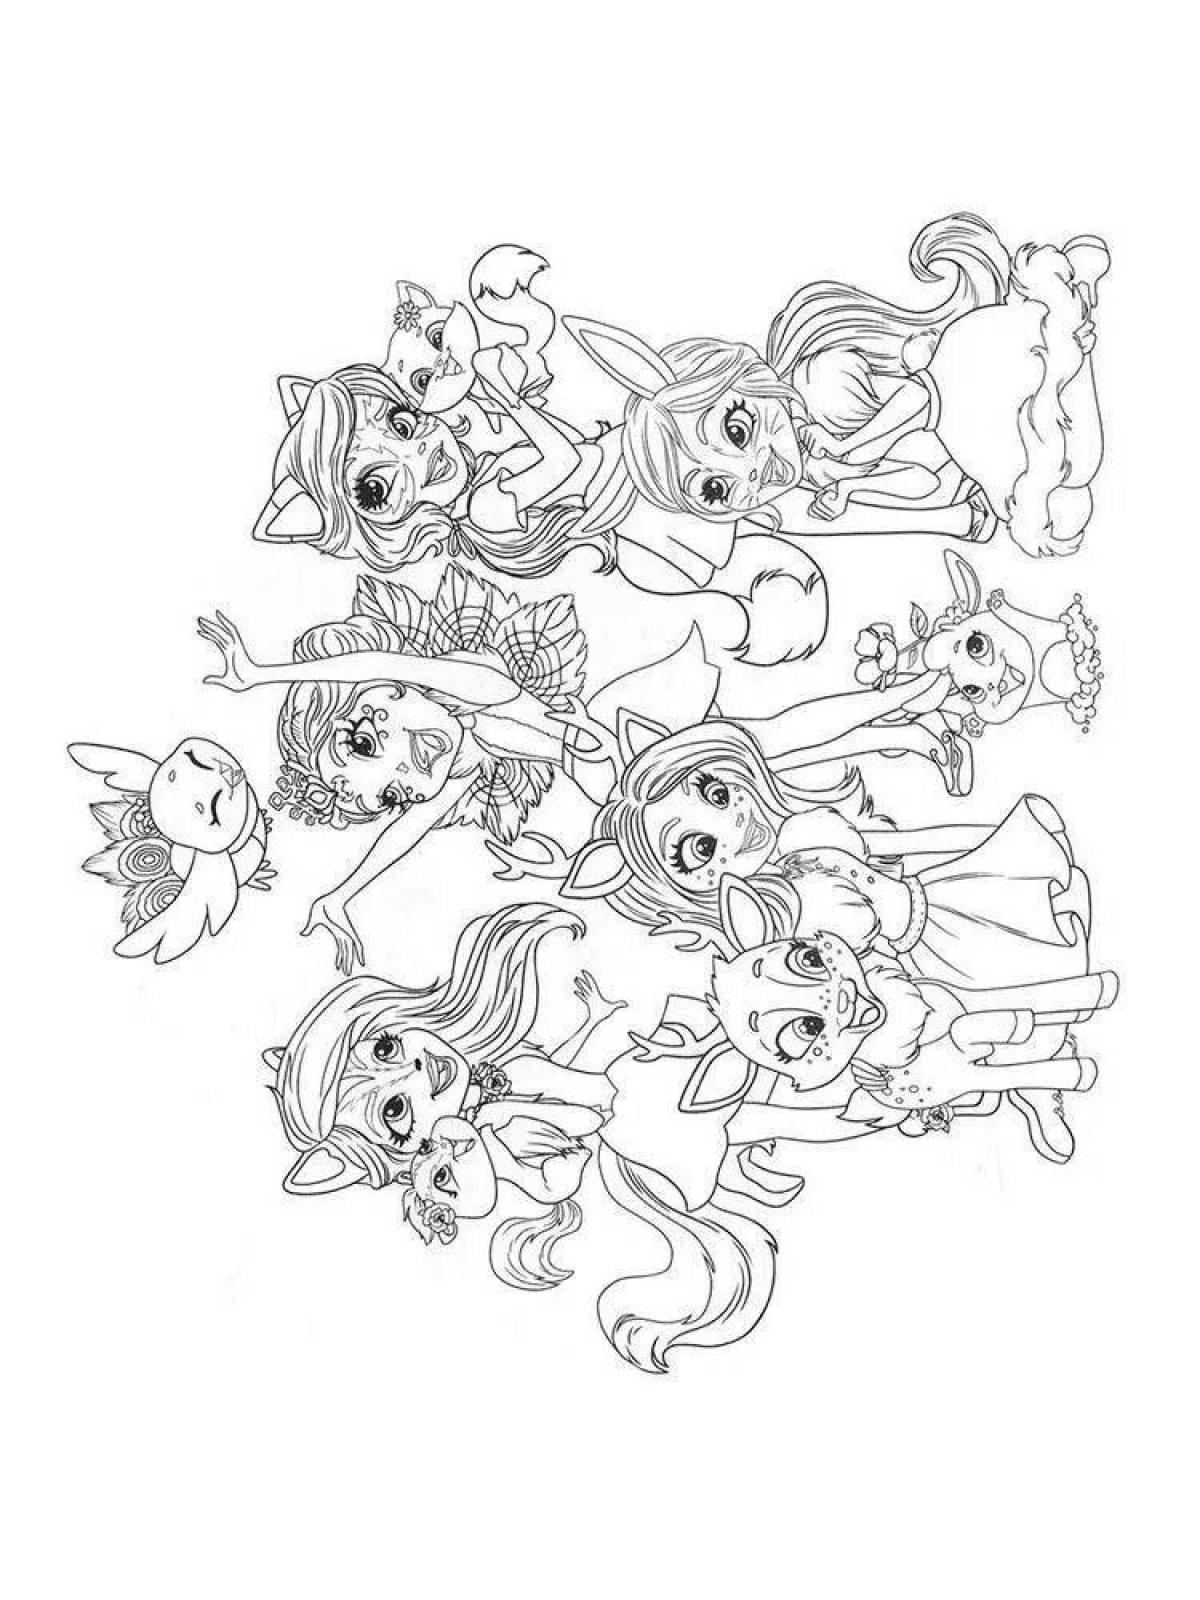 Enchenchimals fairytale coloring pages